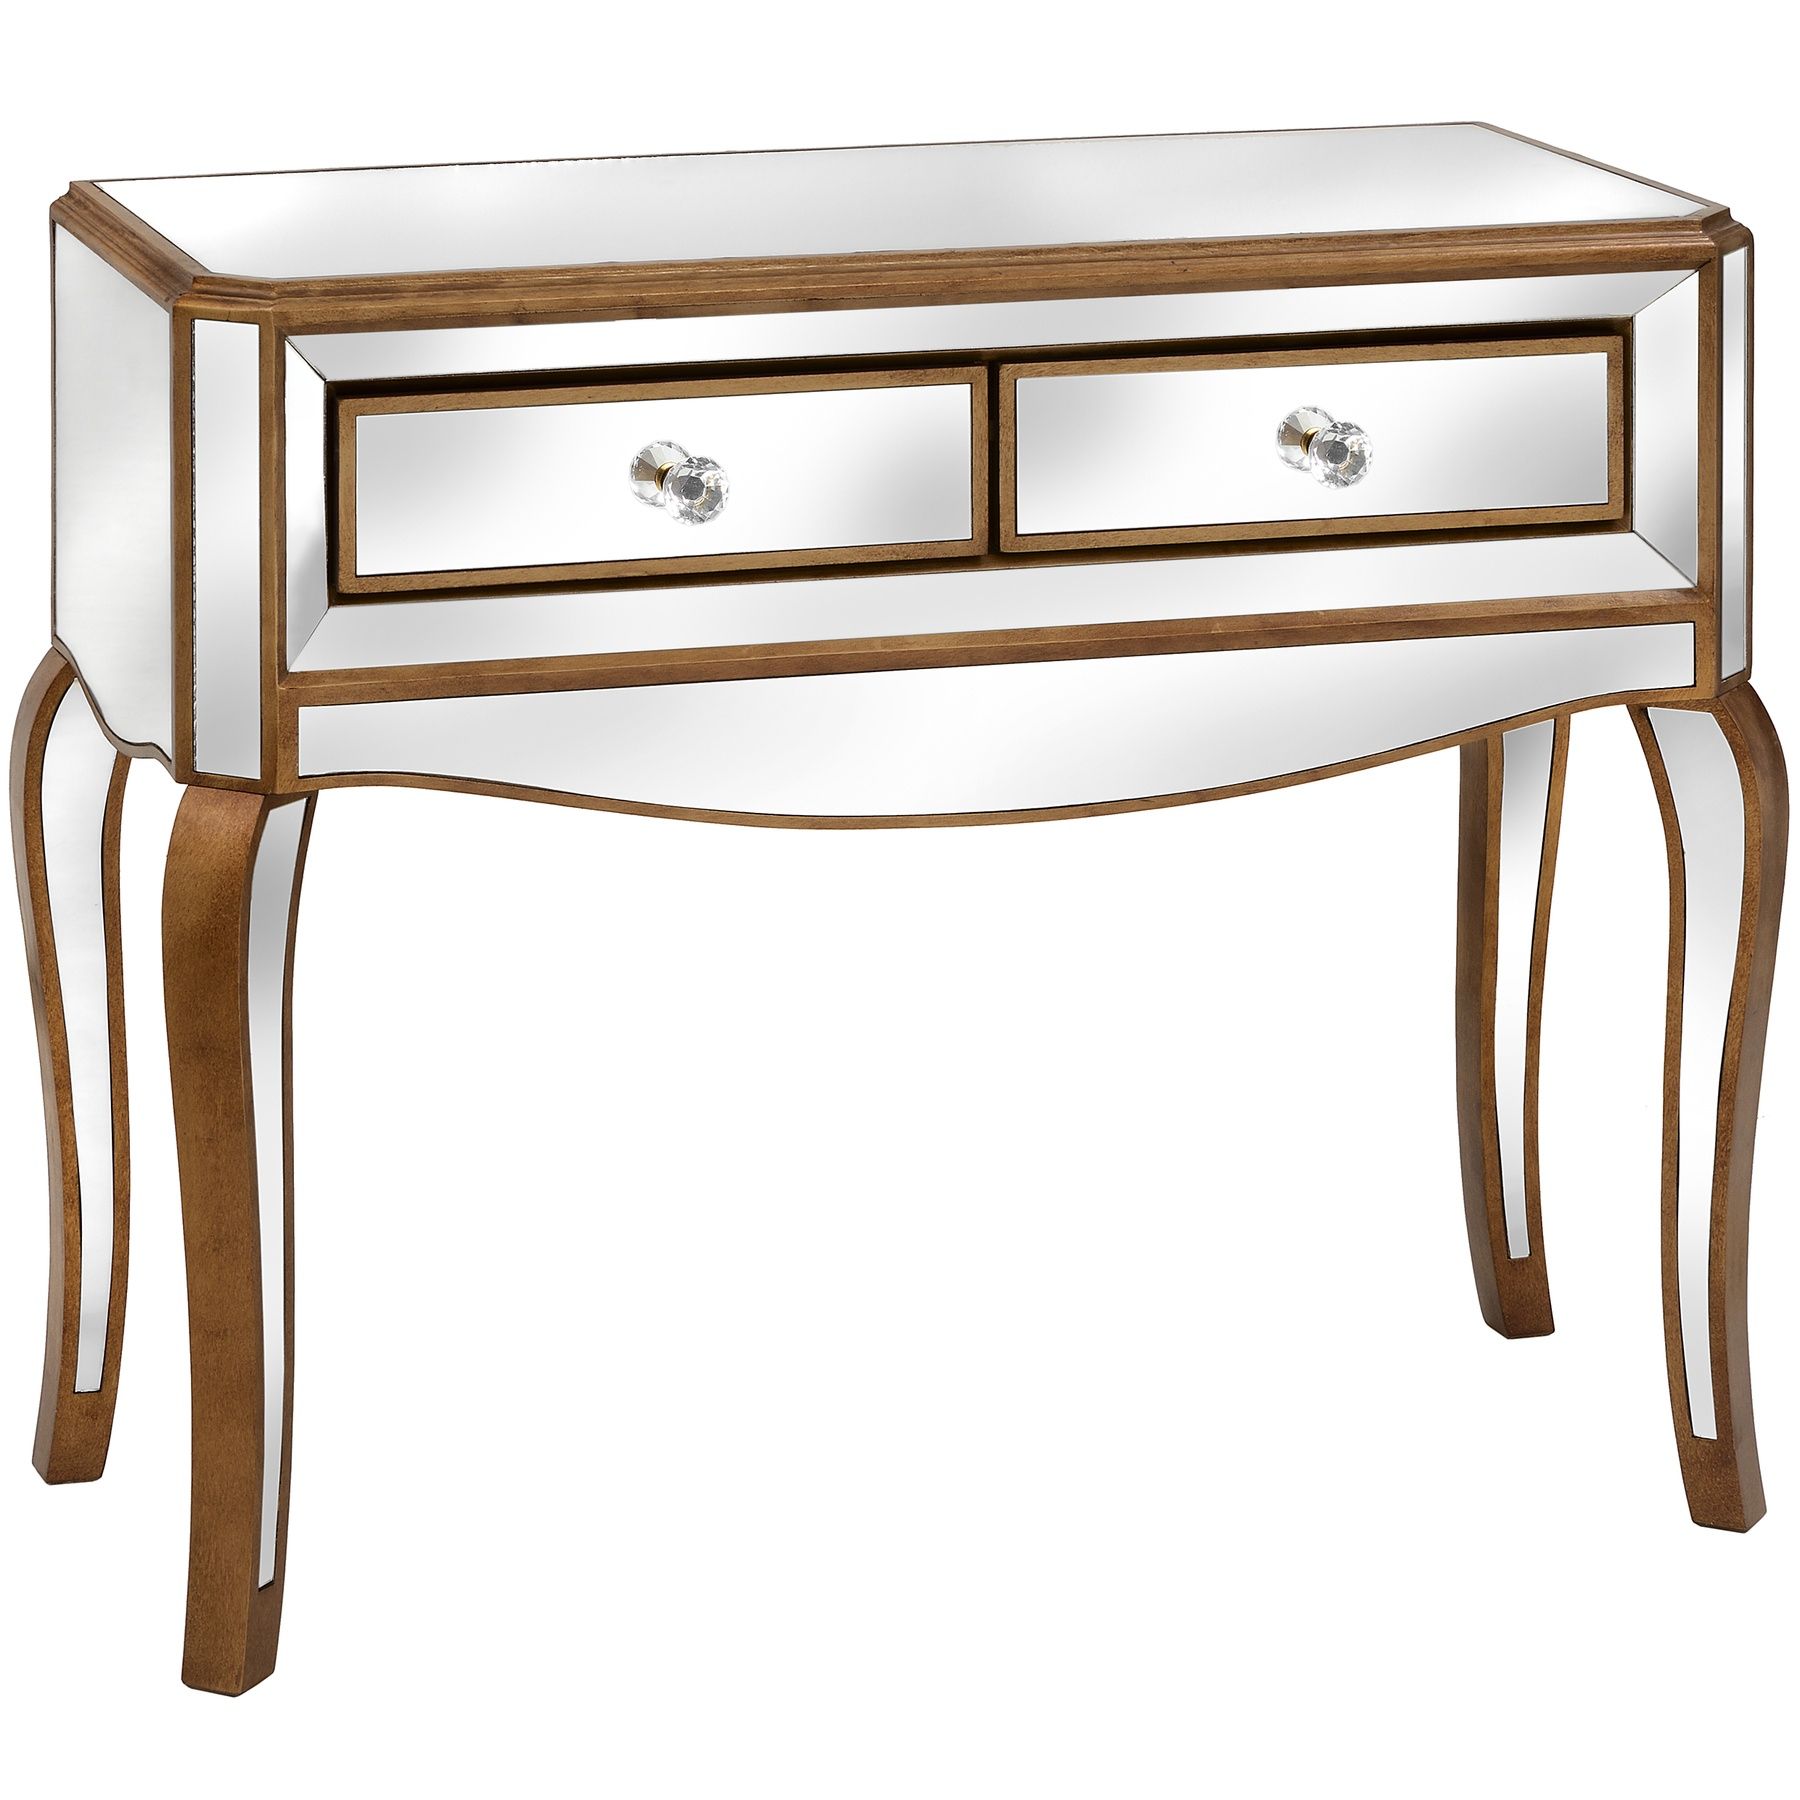 Venetian Mirrored 2 Drawer Console Table From Hill Interiors Pertaining To 2 Drawer Console Tables (View 14 of 20)